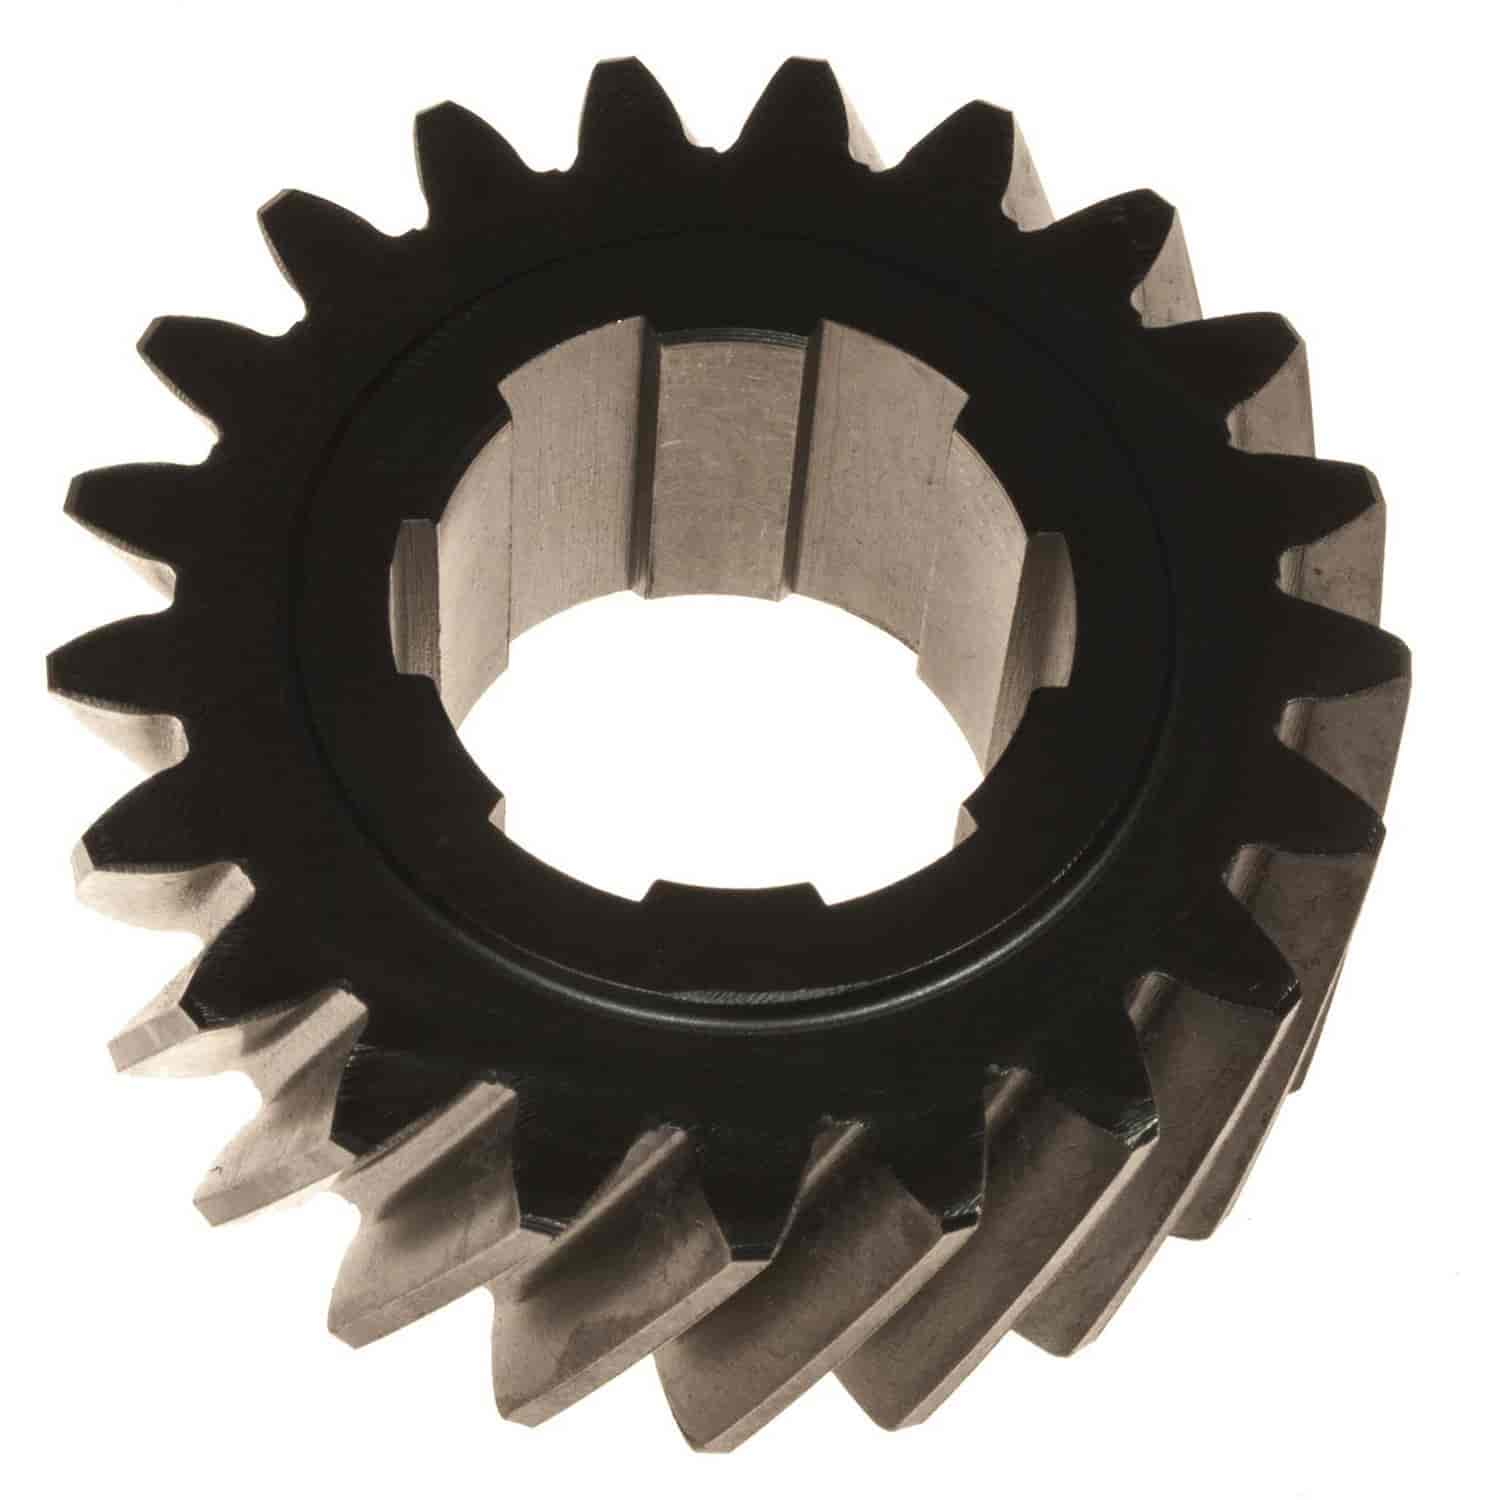 1st Gear Clustershaft 38/21 Tooth Count